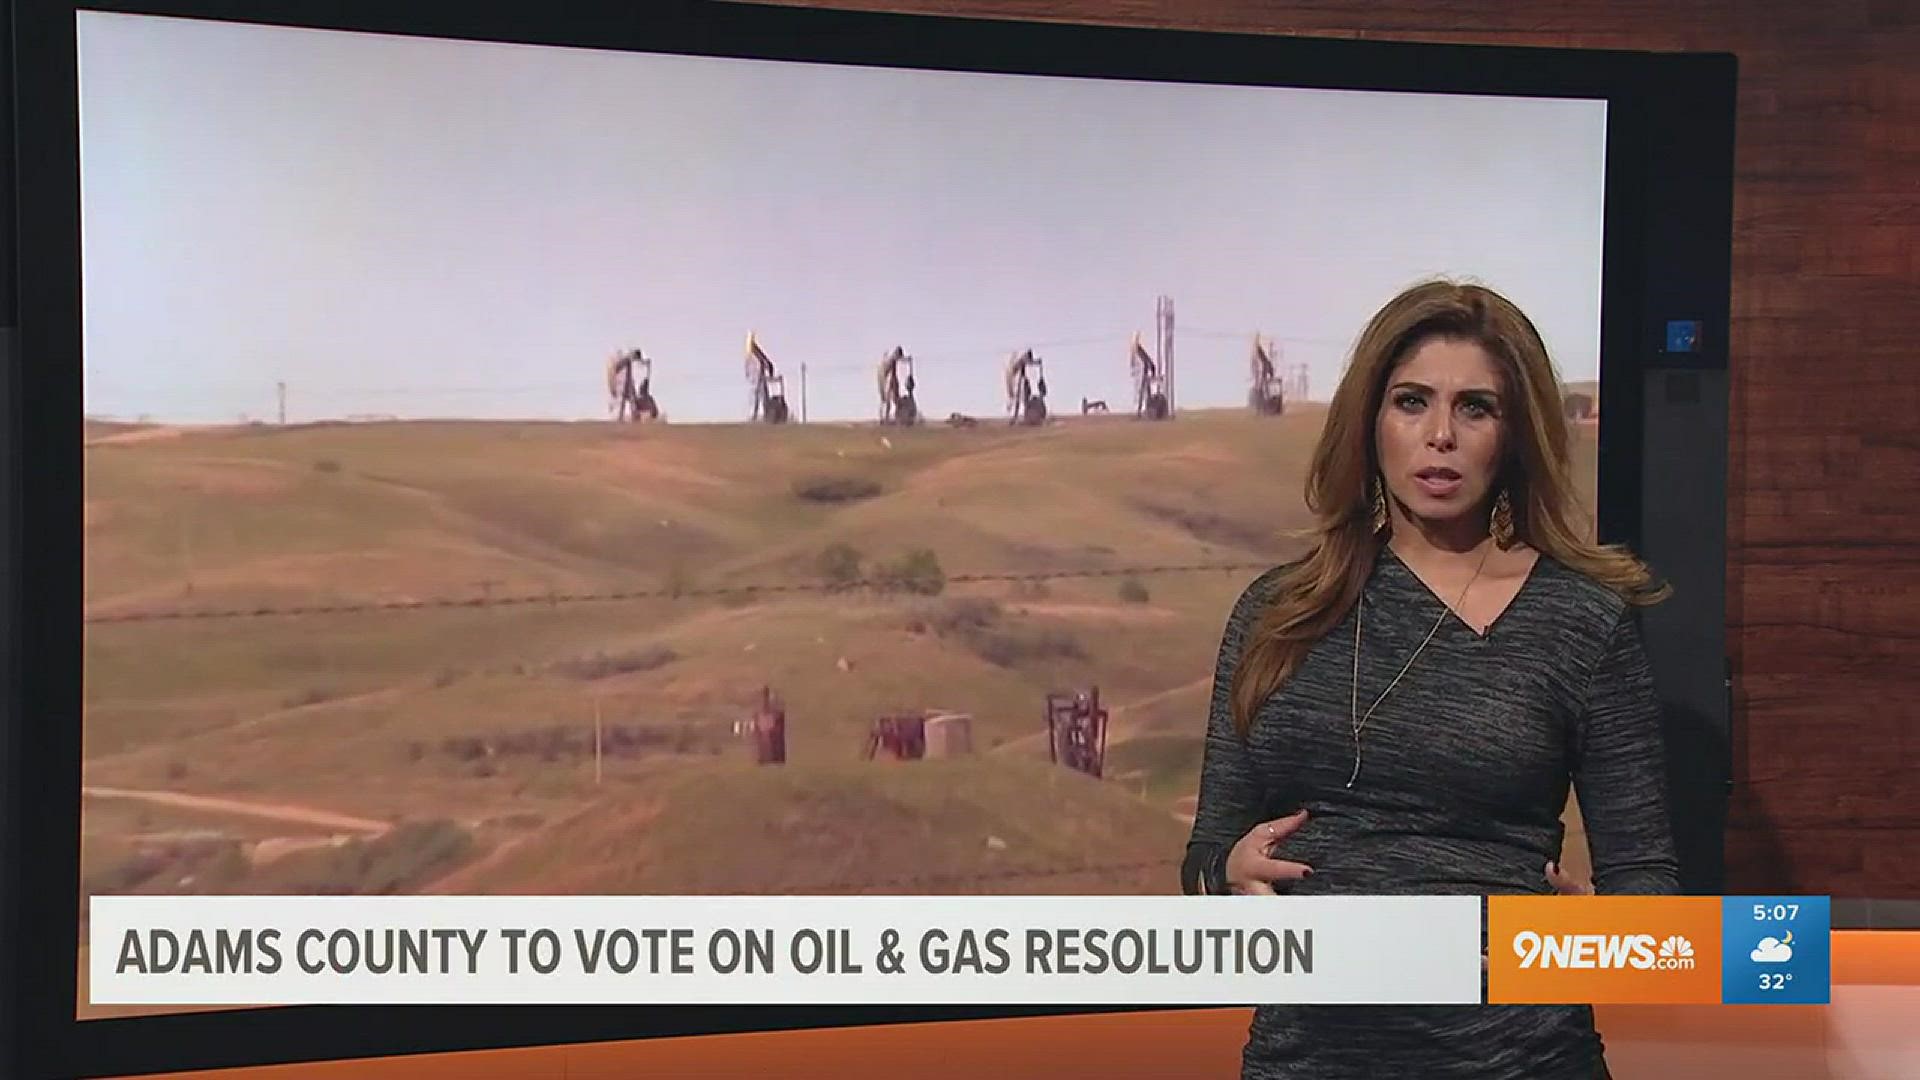 9News reporter Eddie Randle travels to Adams County where the local government plans to vote on a resolution that would ban new oil and gas wells.